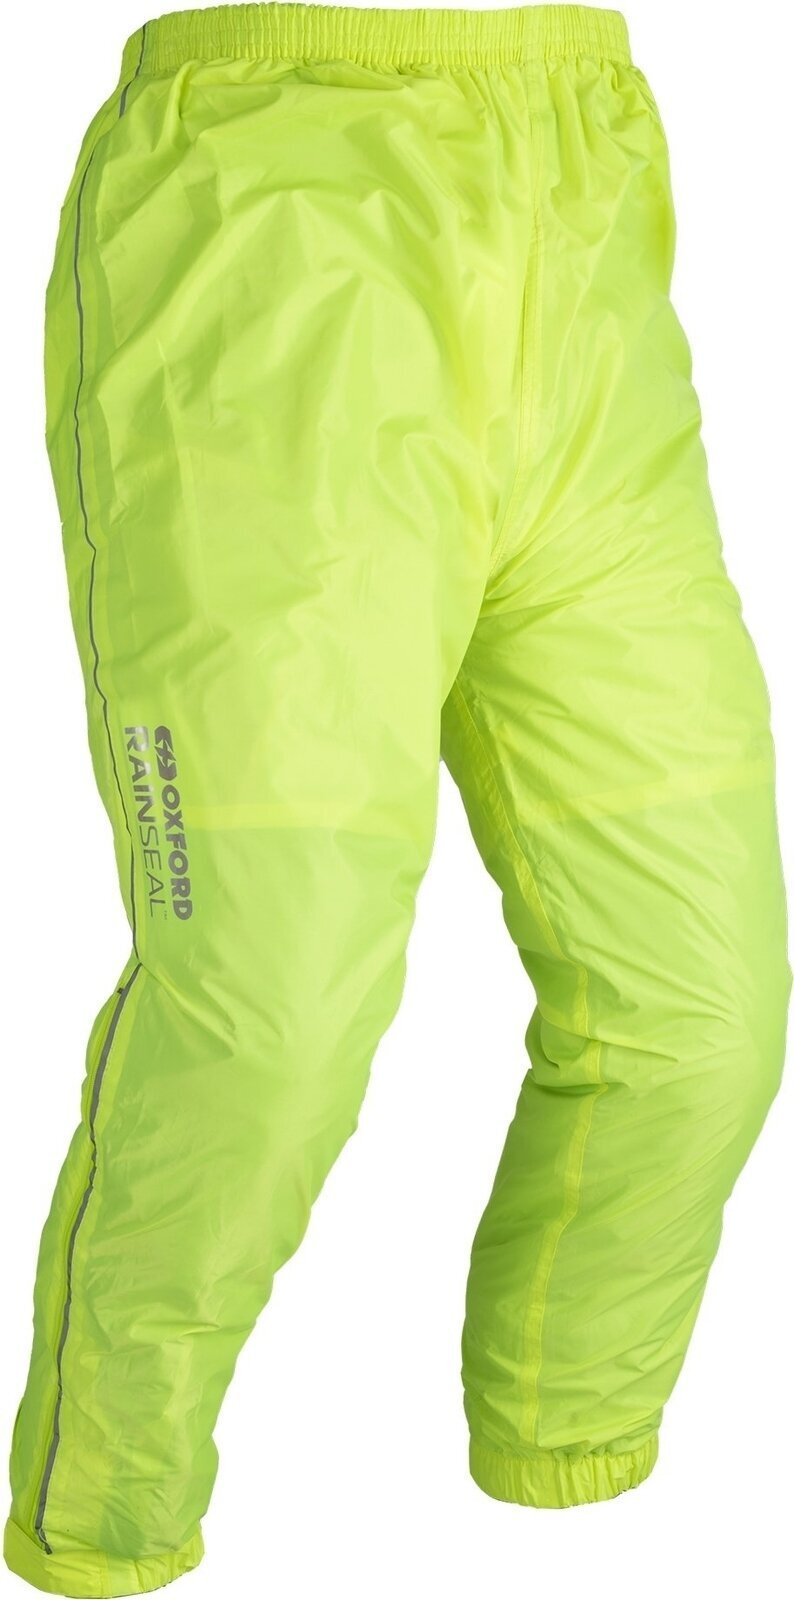 Motorcycle Rain Pants Oxford Rainseal Over Trousers Fluo 4XL